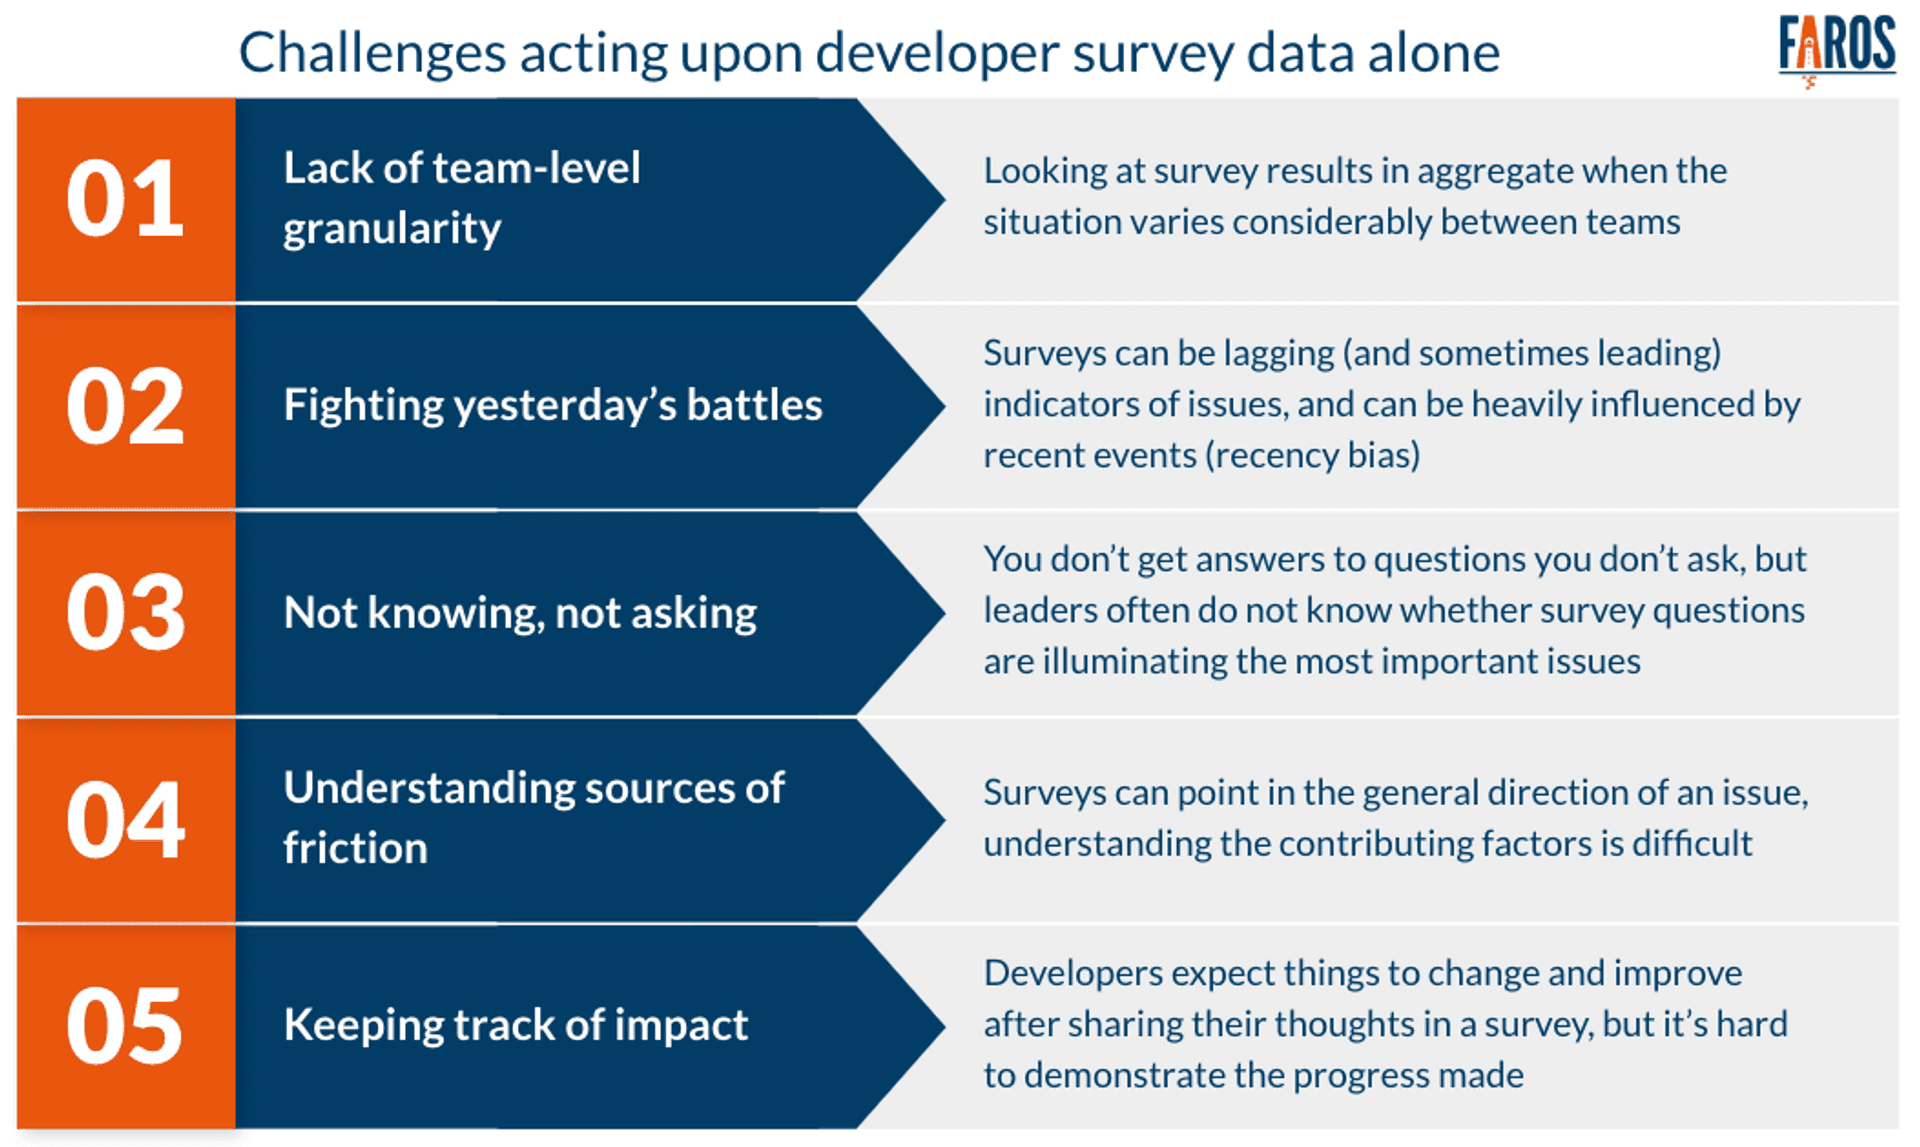 List summarizing the issues engineering leaders face when dealing with developer survey data alone 